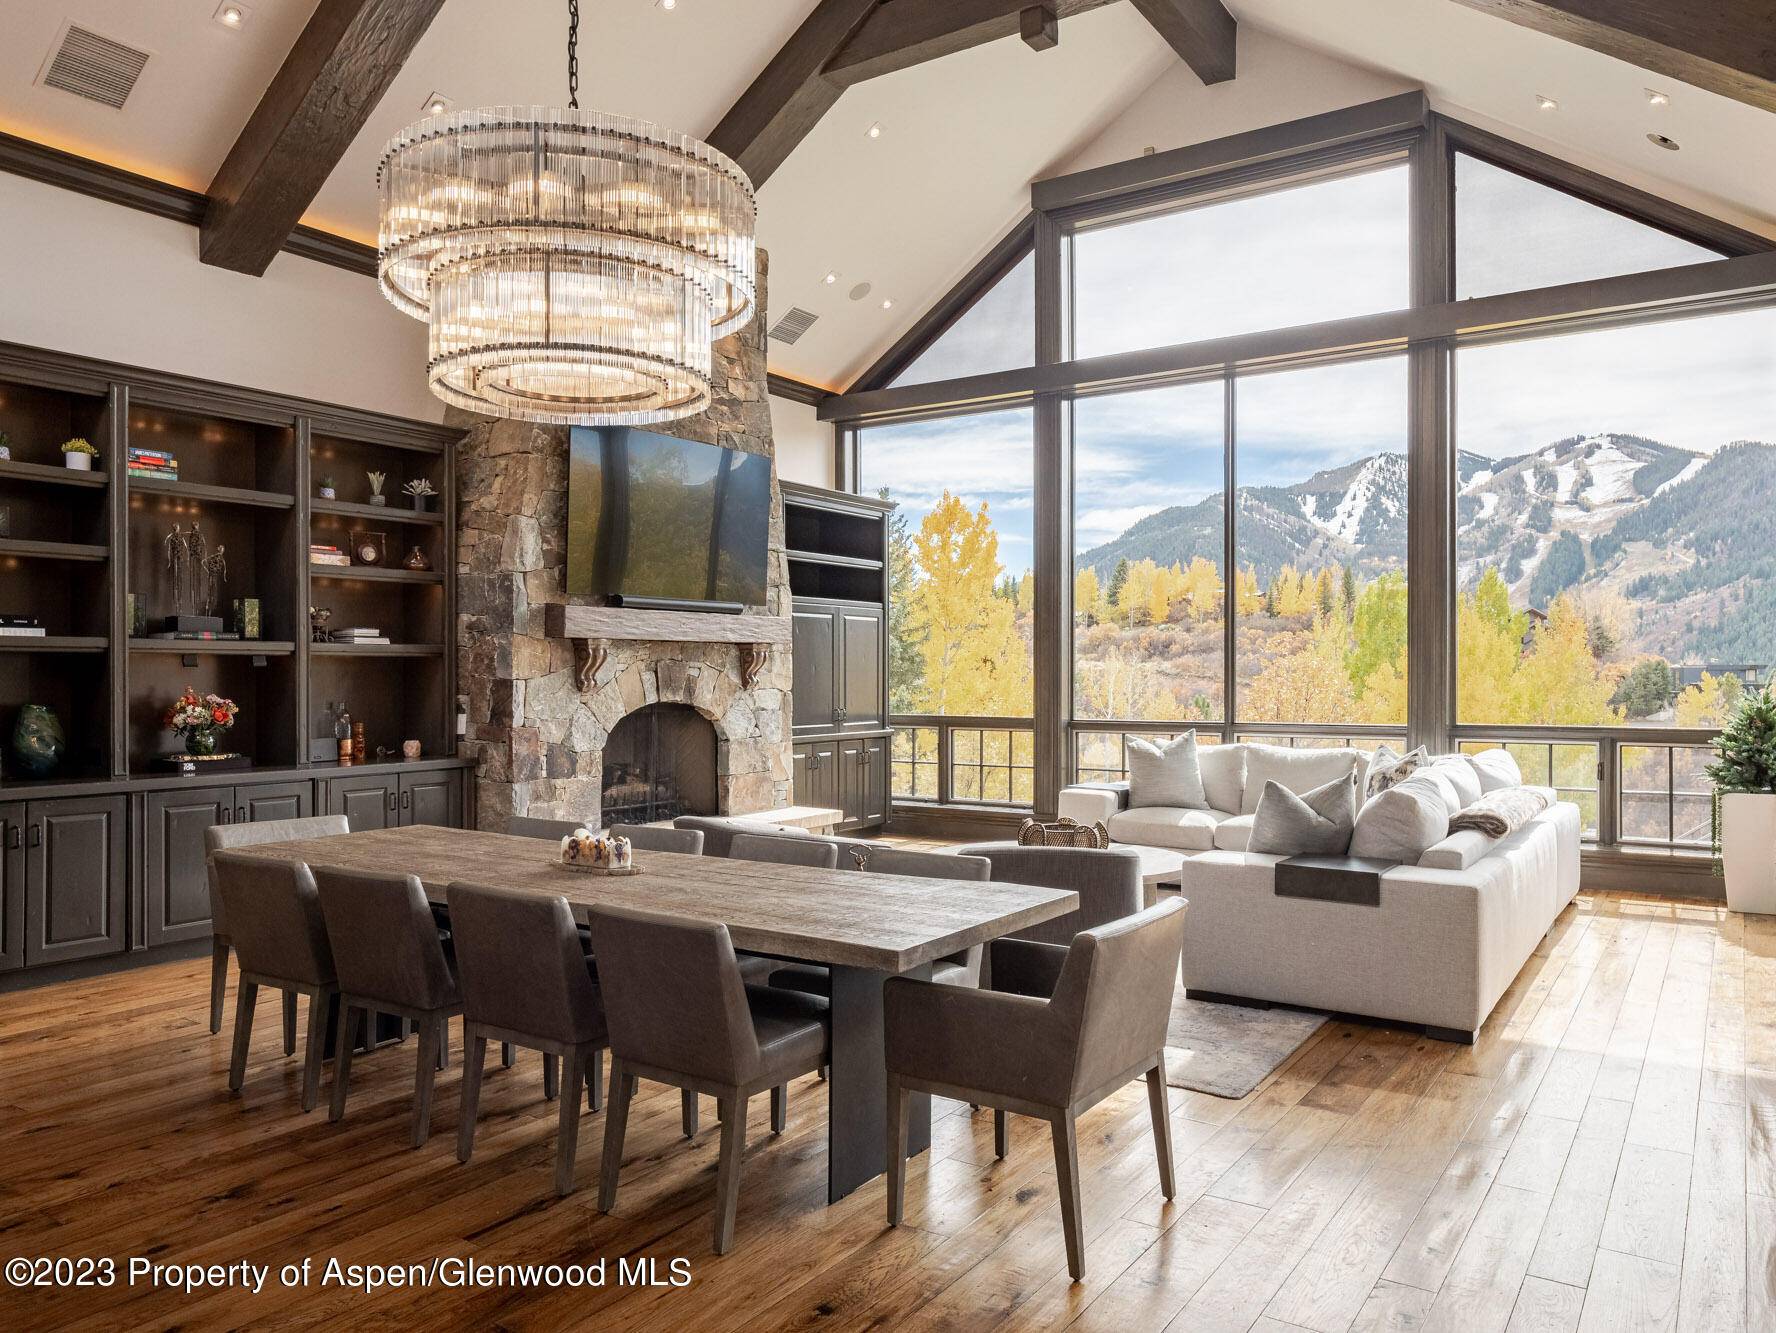 Luxury abounds inside and out with this reimagined Red Mountain sanctuary.